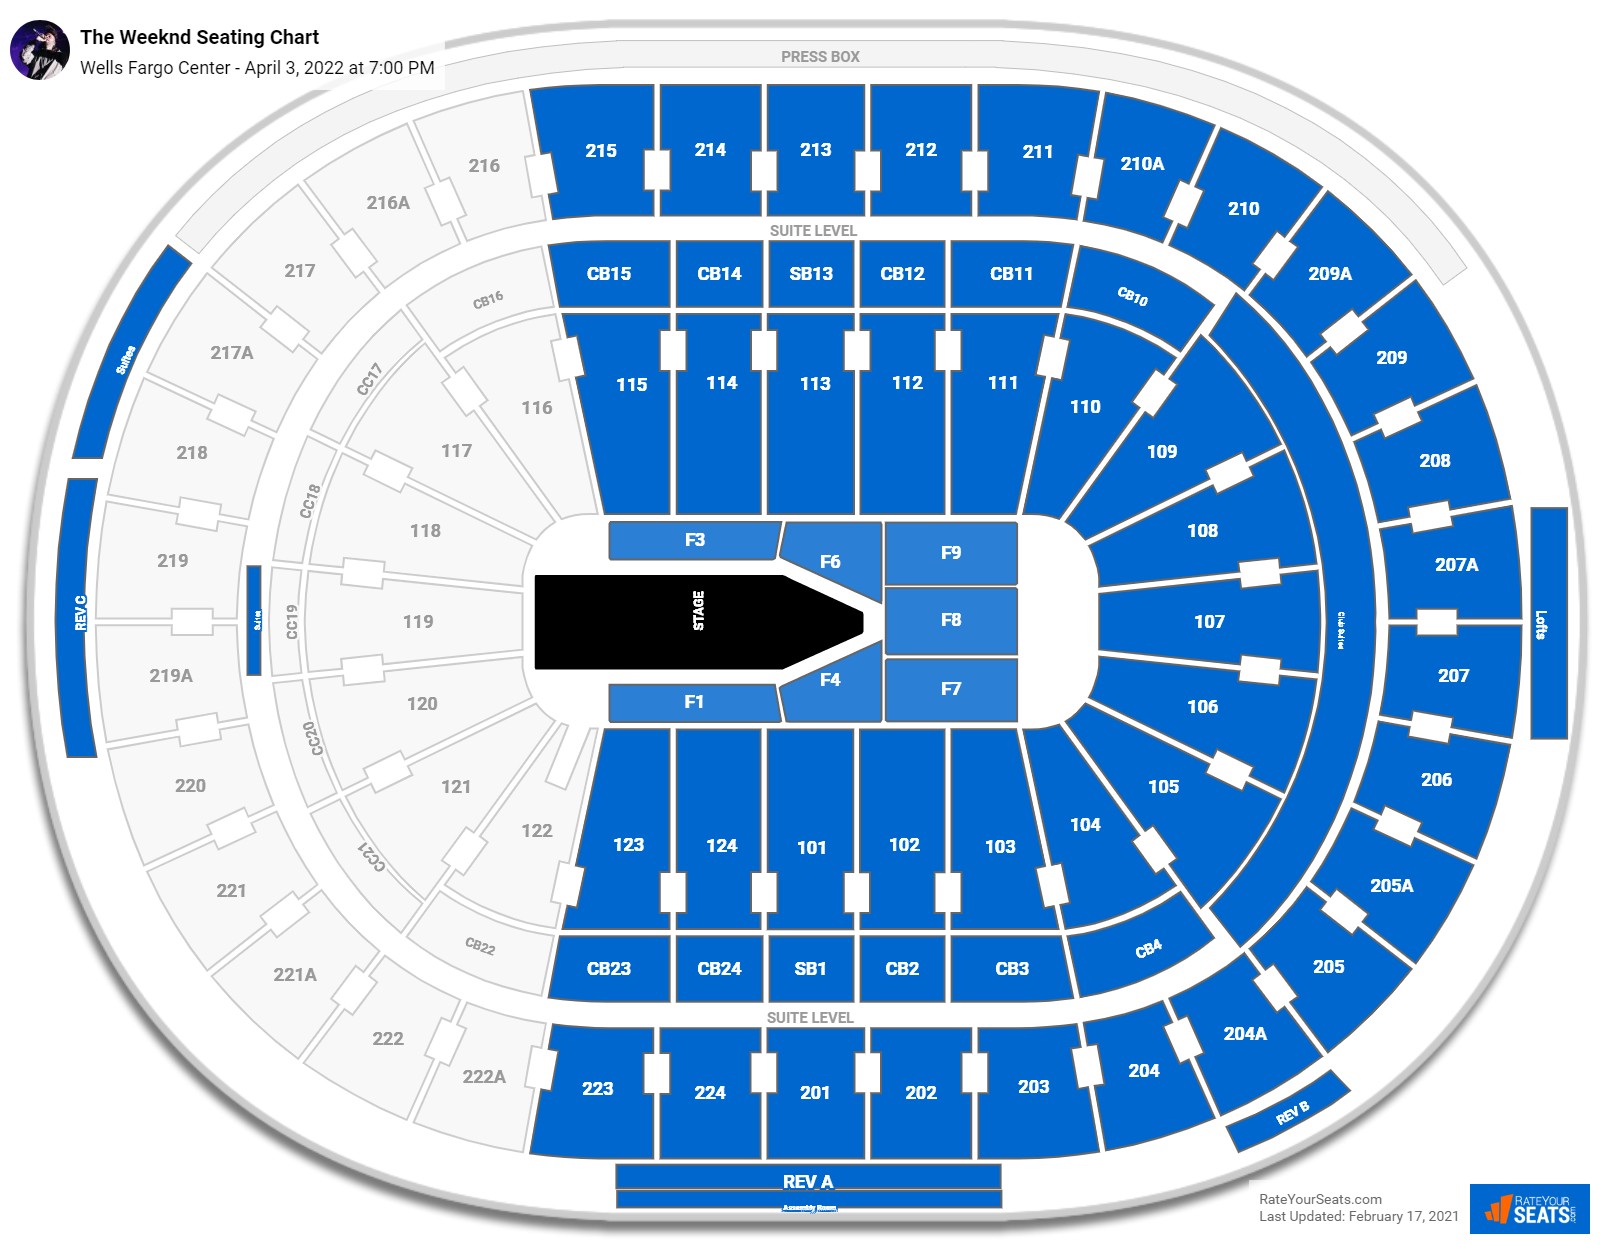 Wells Fargo Center Seating Charts for Concerts - RateYourSeats.com